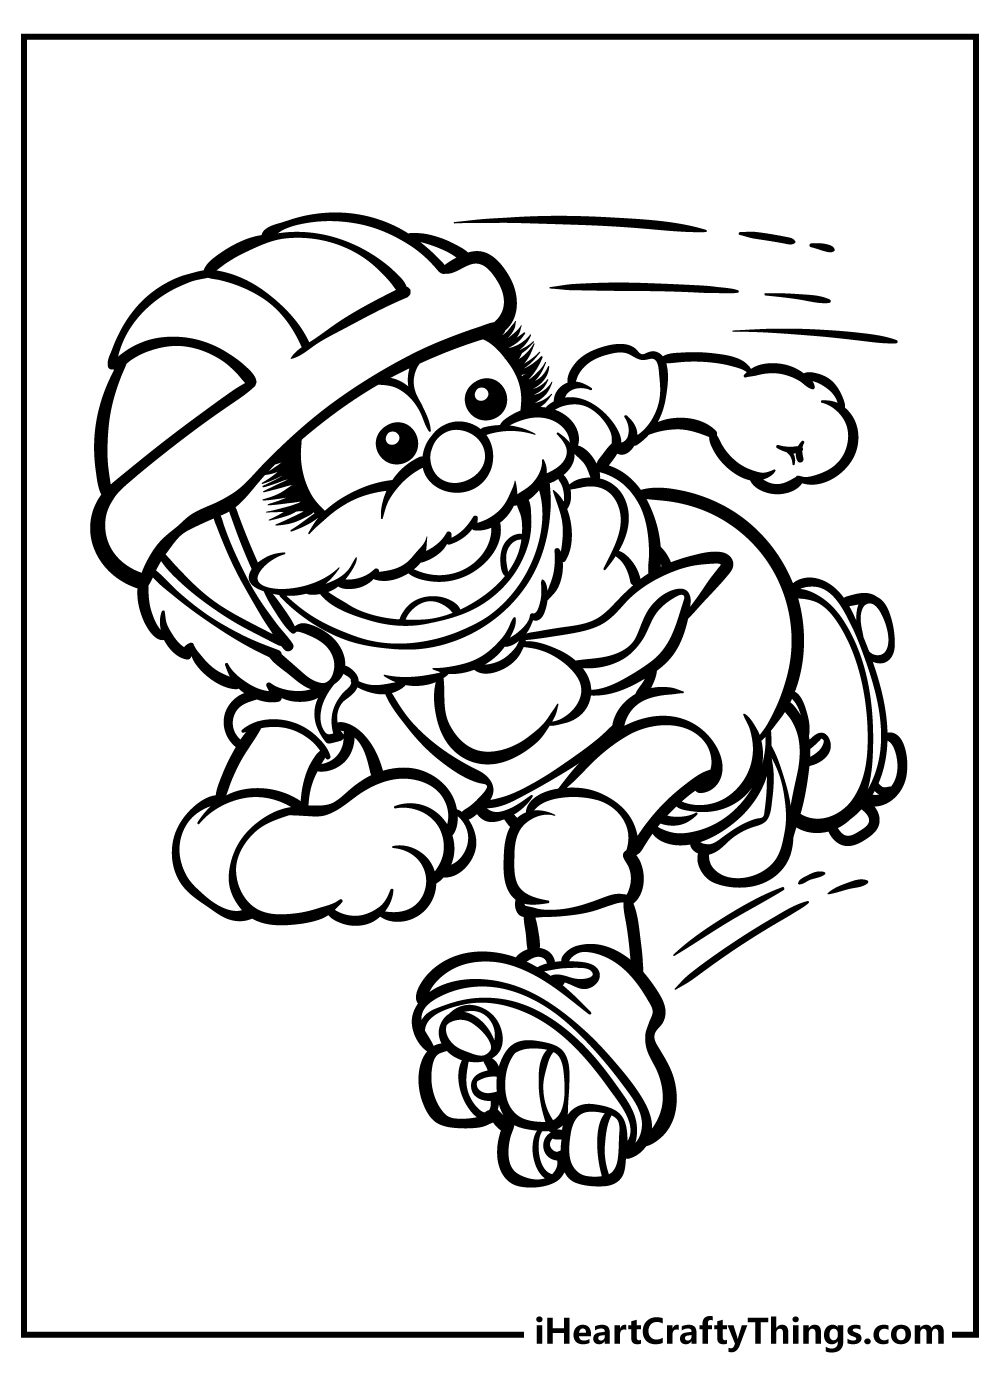 Muppet Babies Coloring Pages for preschoolers free printable